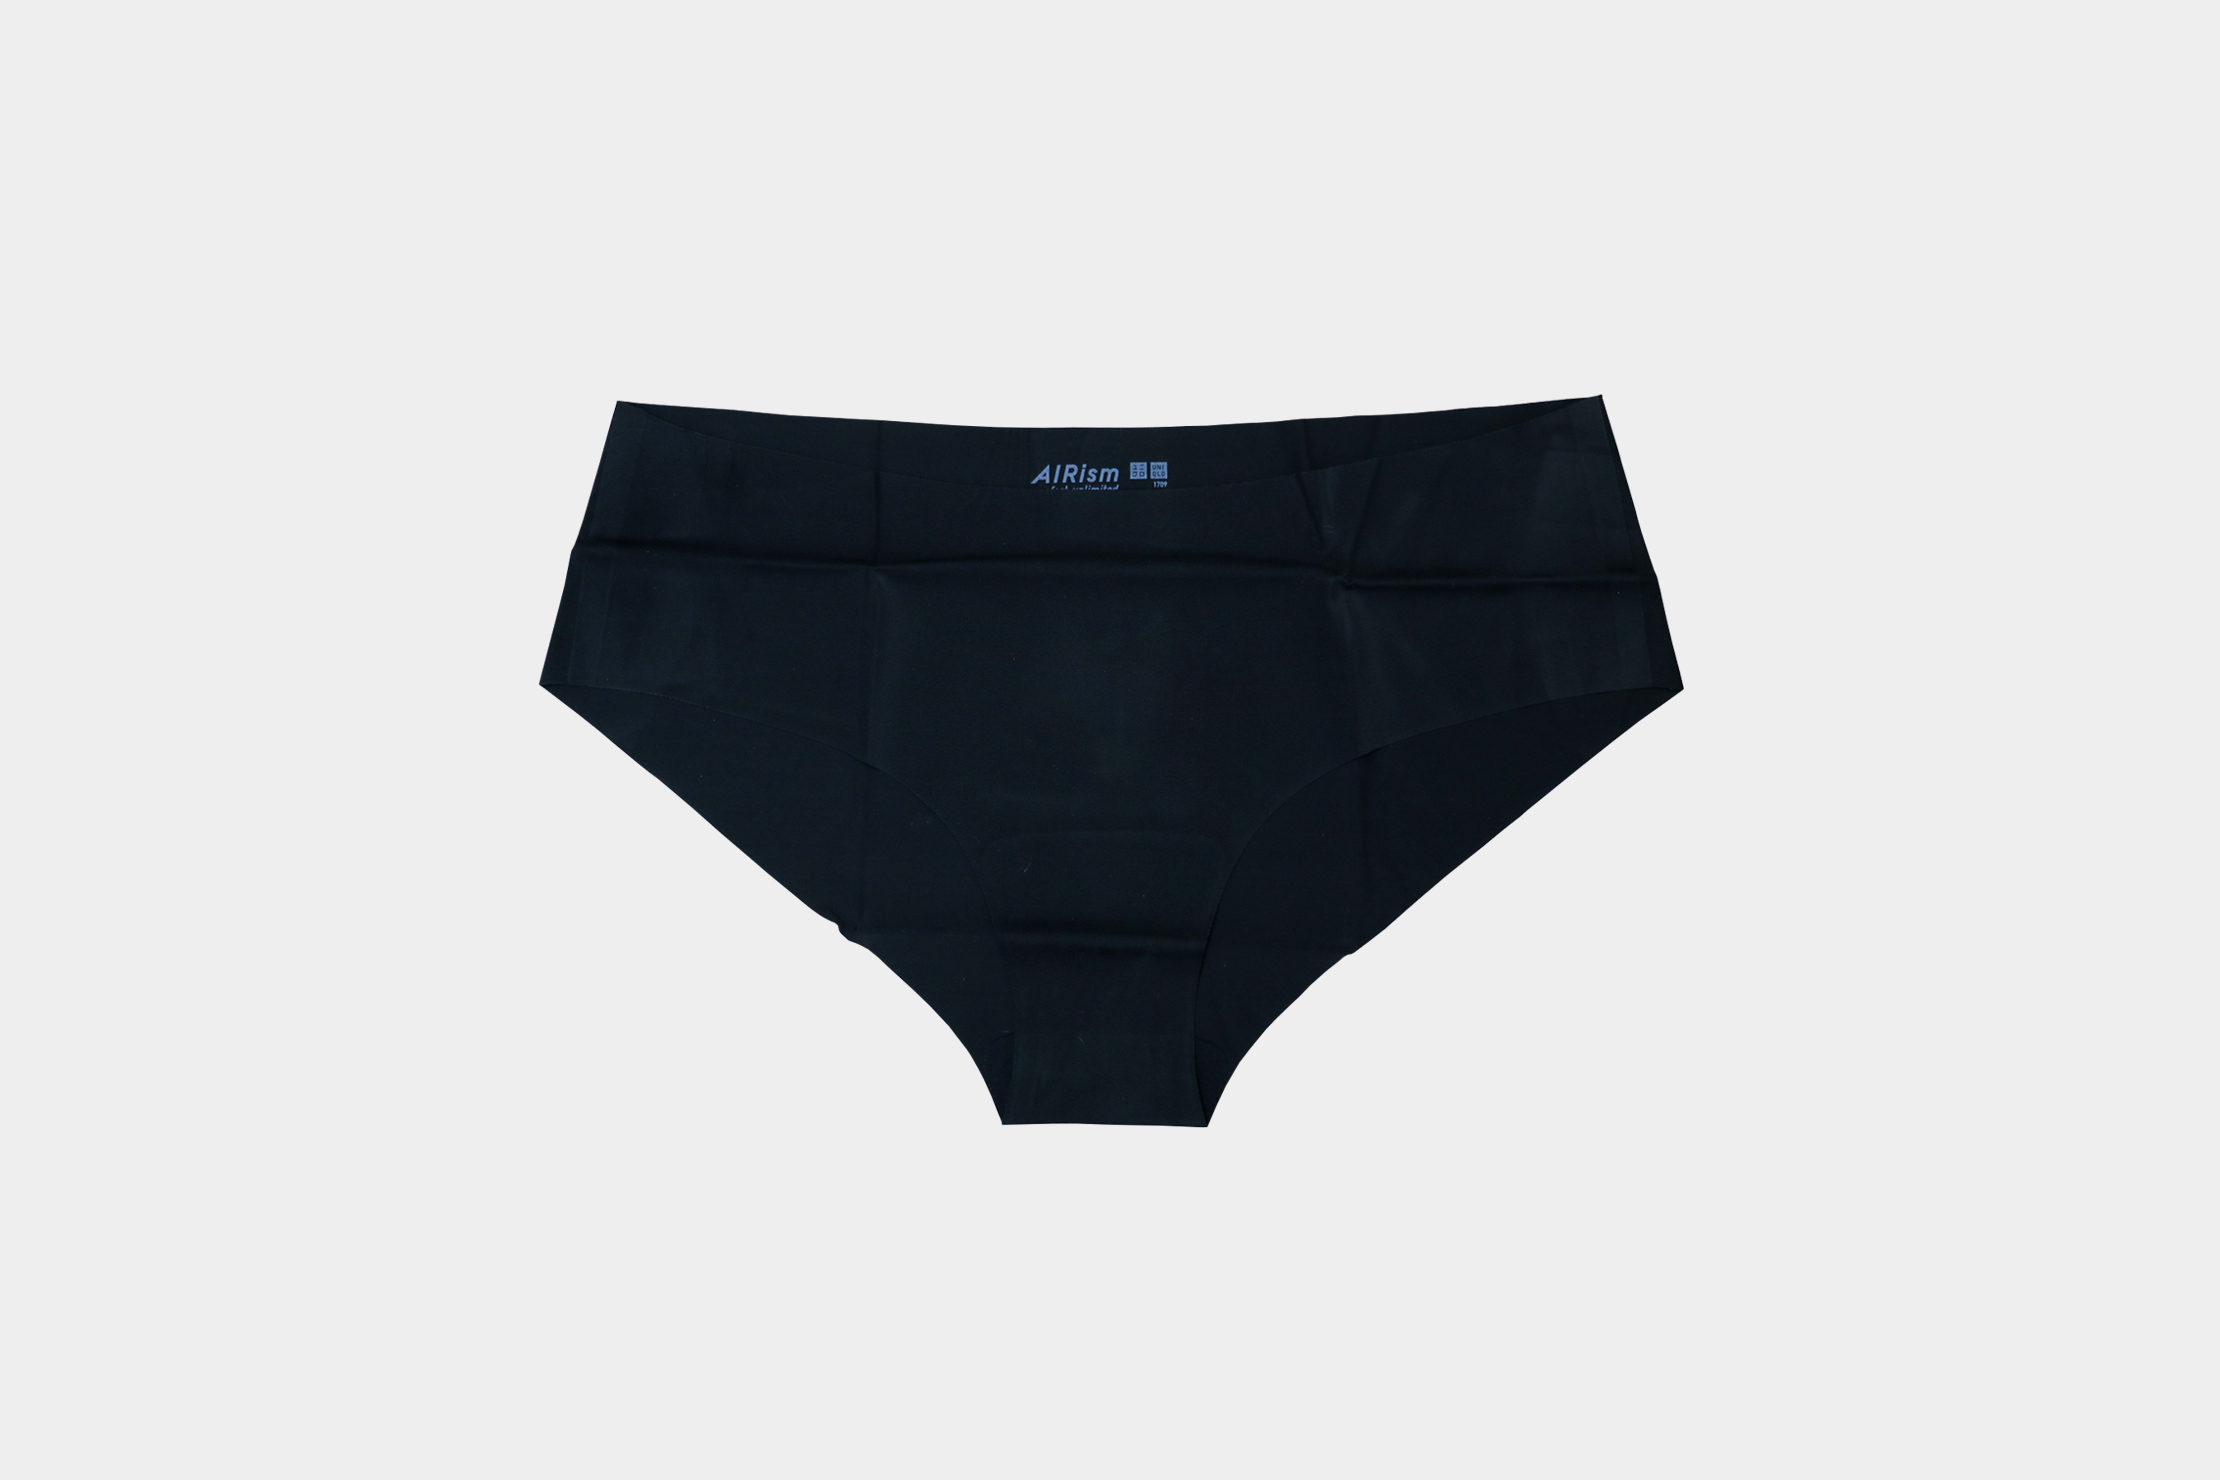 AIRism Ultra Seamless Boxers